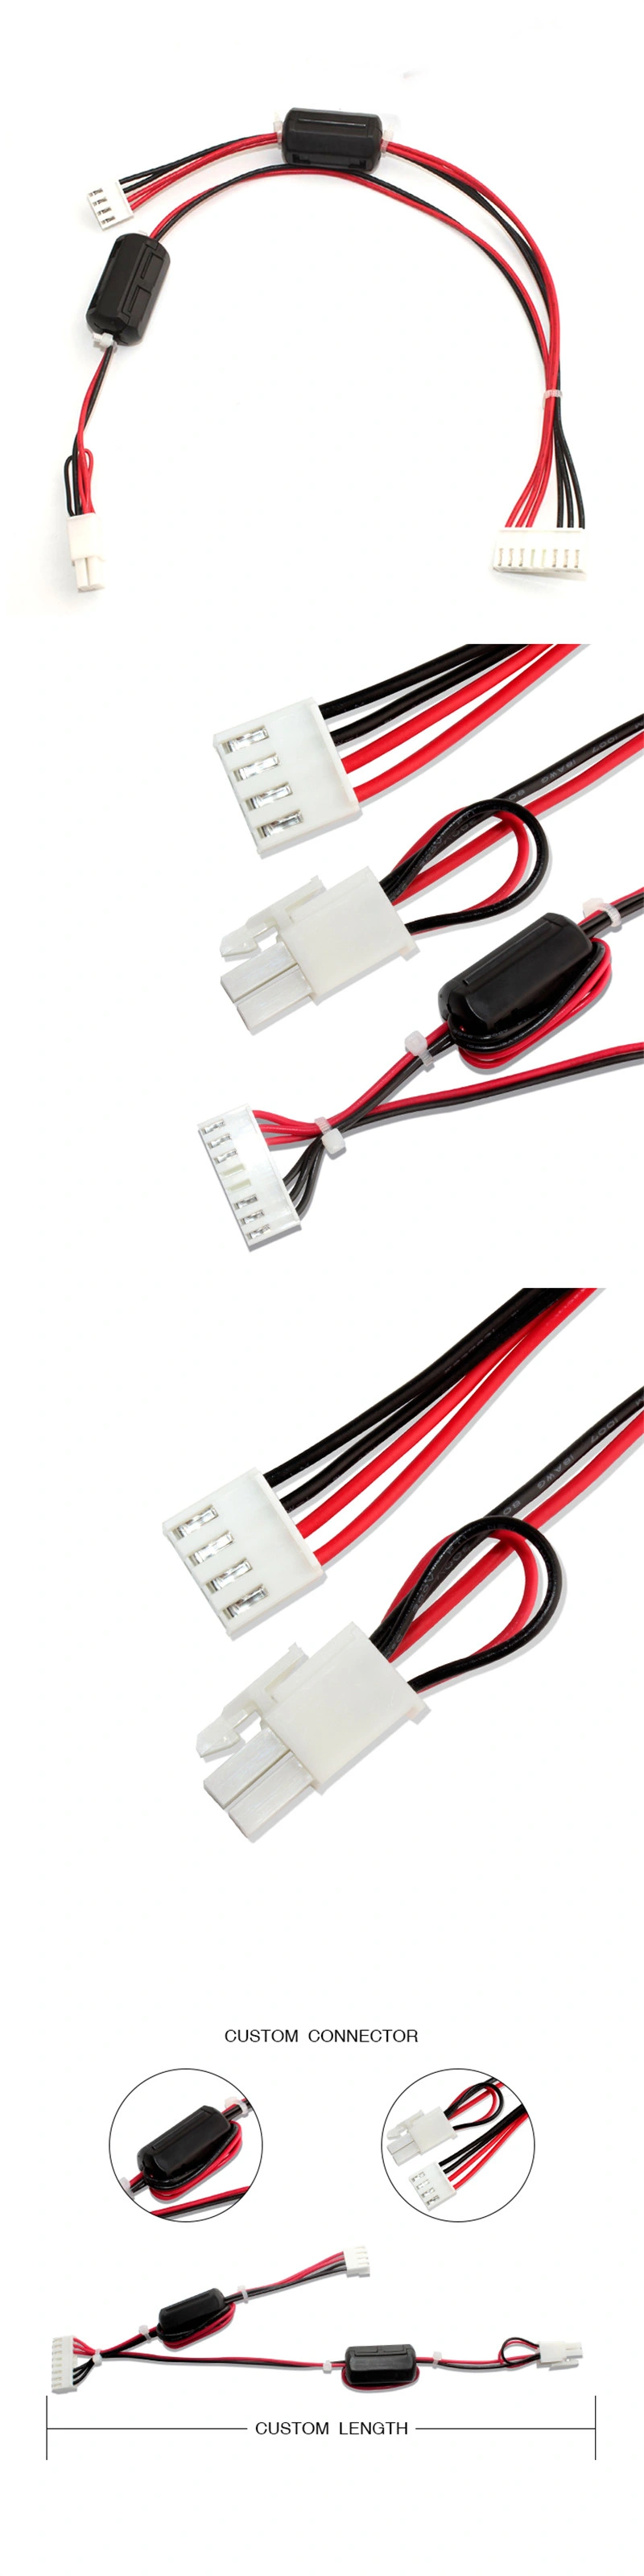 Custom Molding Cable Assemblies & Cable Assembly Wiring Harness